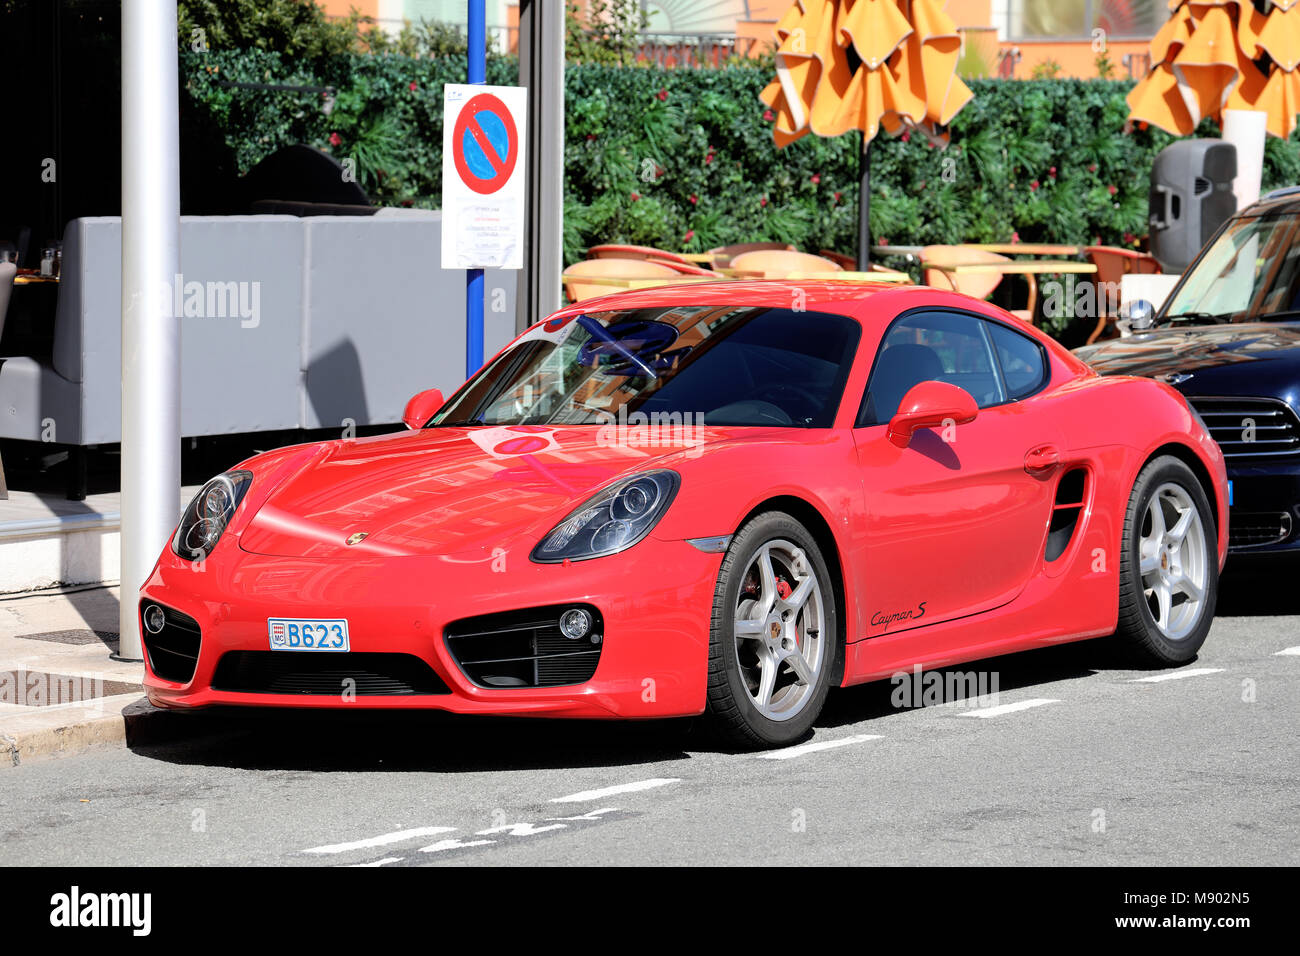 Menton, France - March 19, 2018: Luxury Red Porsche 718 Cayman S Parked In The Street Of Menton On The French Riviera Stock Photo